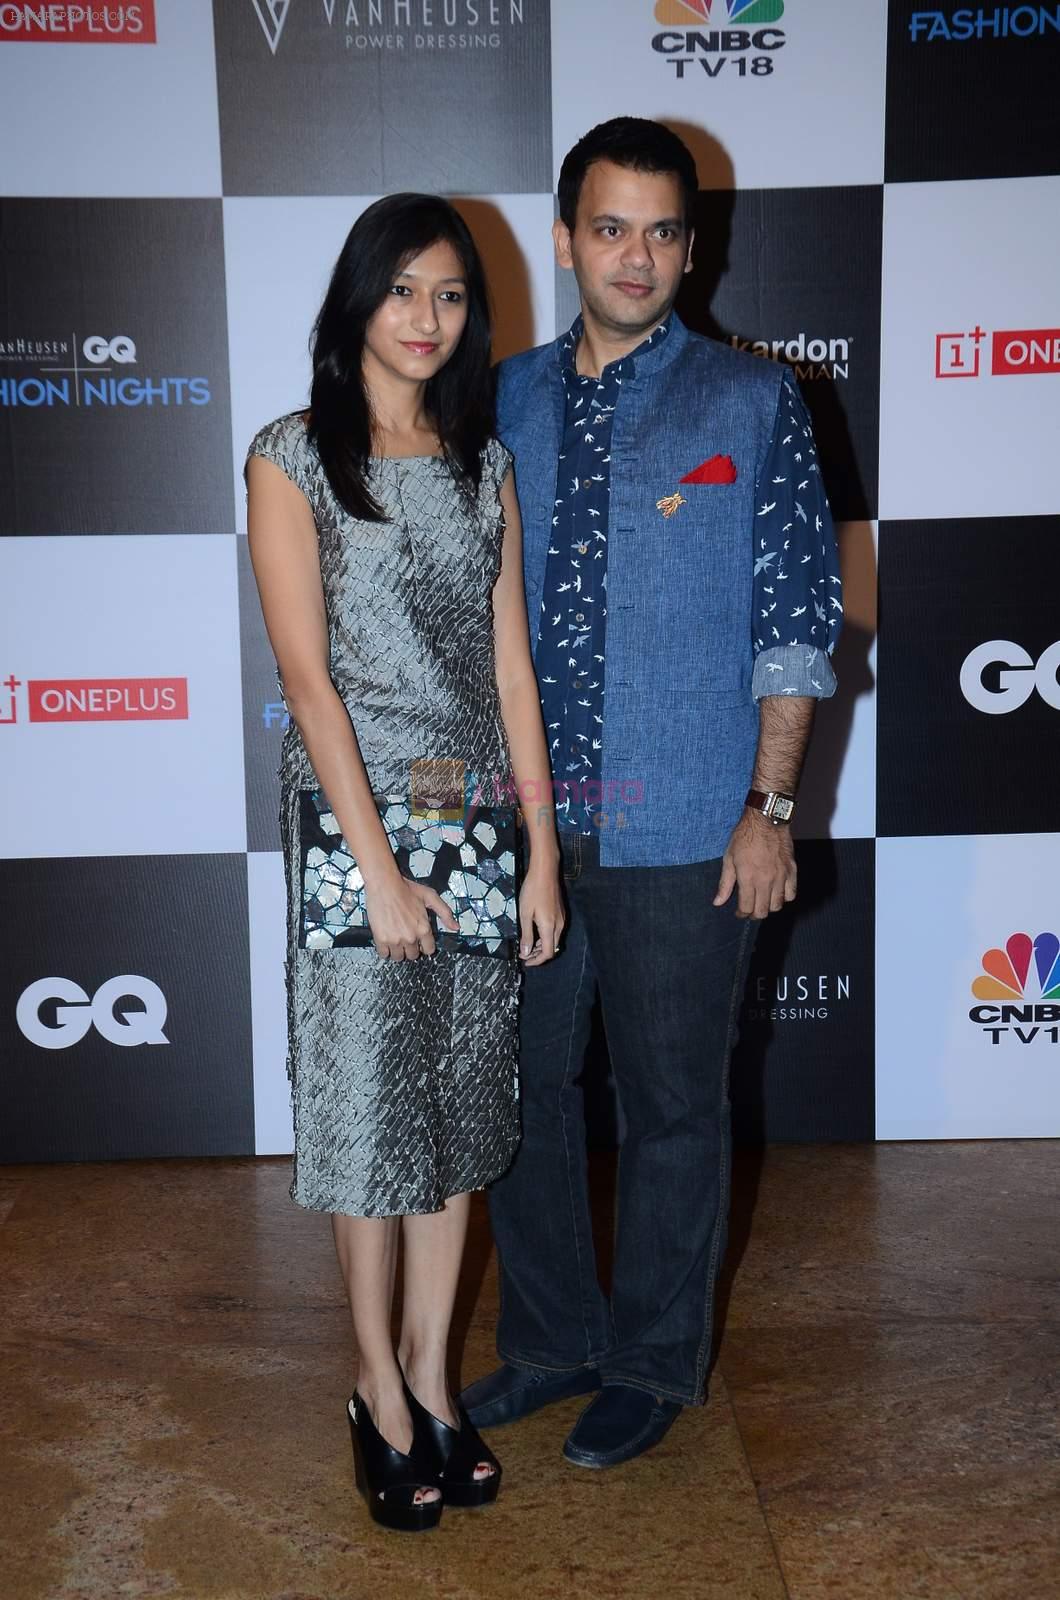 Nachiket Barve on day 2 of GQ Fashion Nights on 3rd Dec 2015